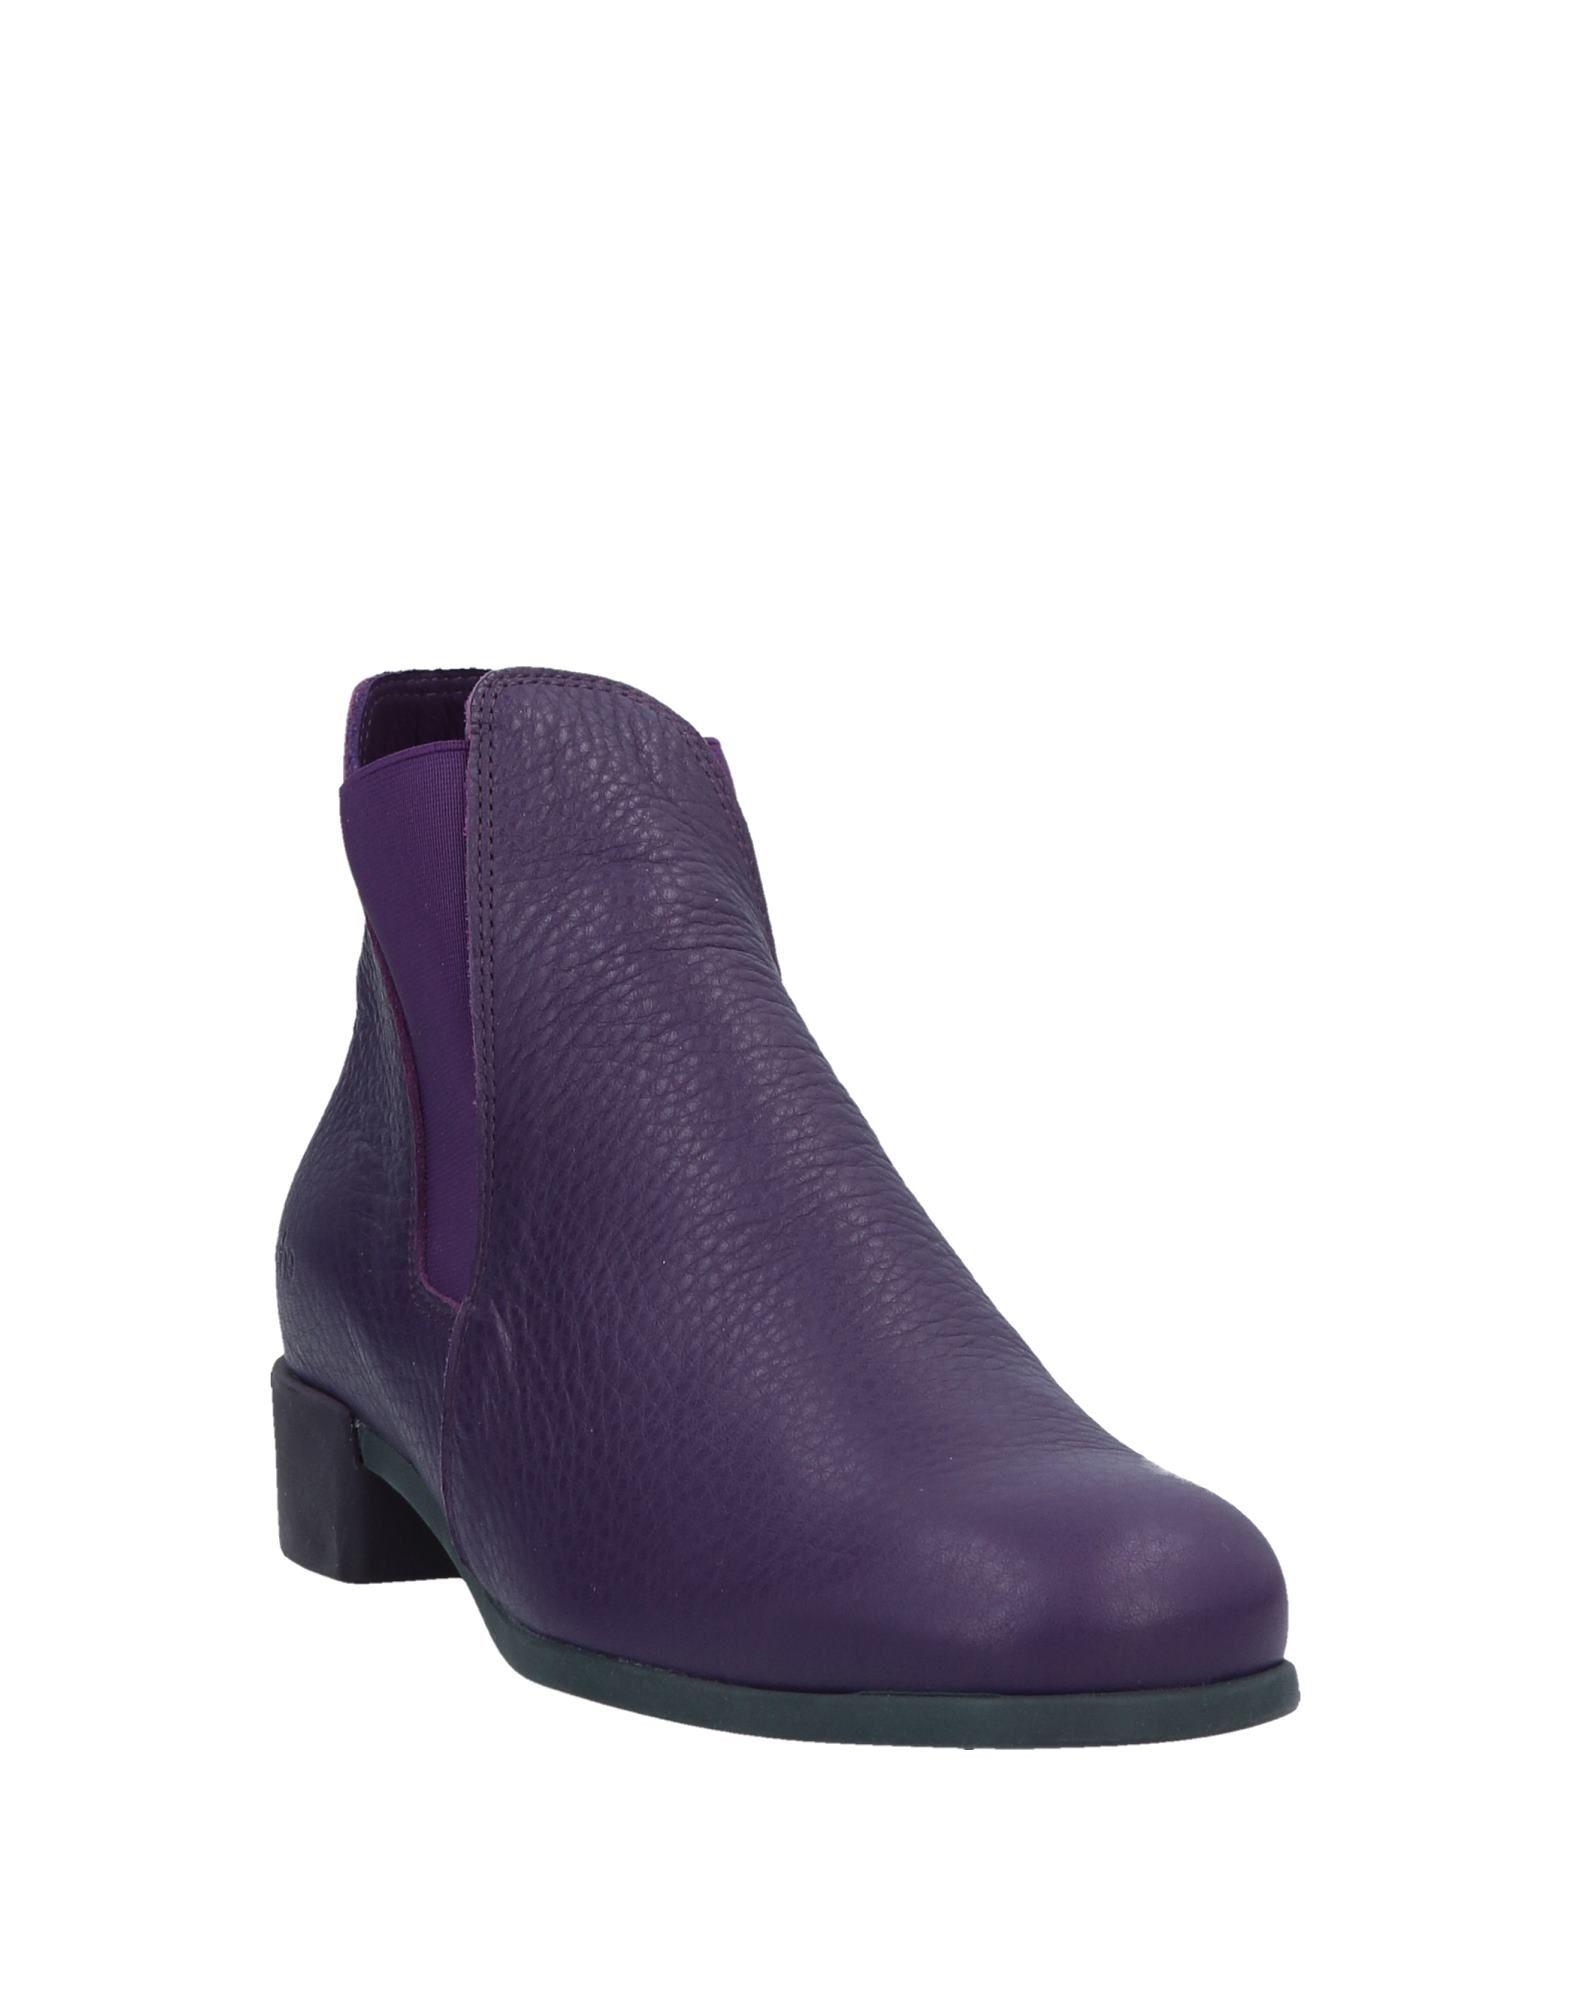 Arche Leather Ankle Boots in Dark Purple (Purple) - Lyst